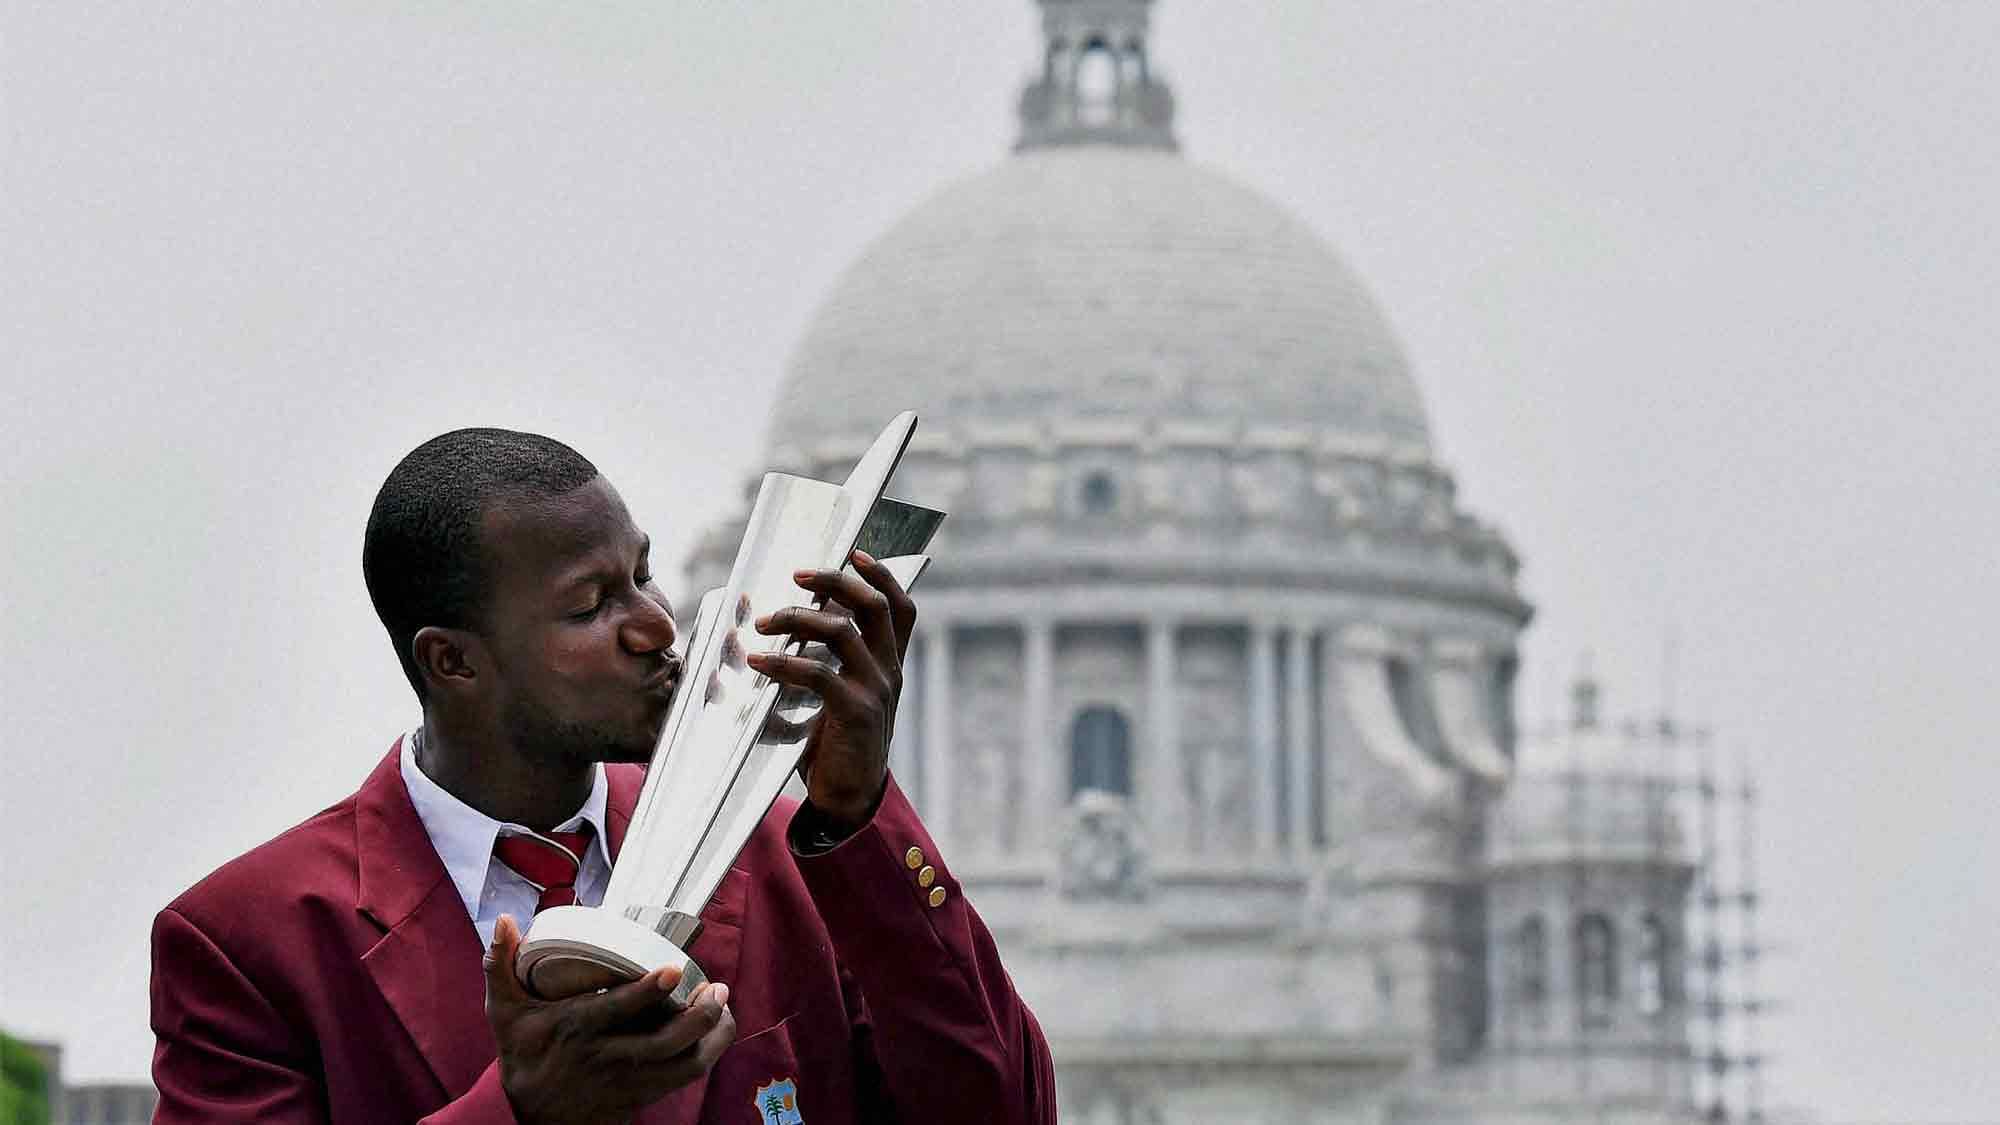 Kolkata: West Indies Captain Darren Sammy kisses the ICC T20 World cup trophy in front of Victoria Memorial in Kolkata on Monday. (Photo: PTI)